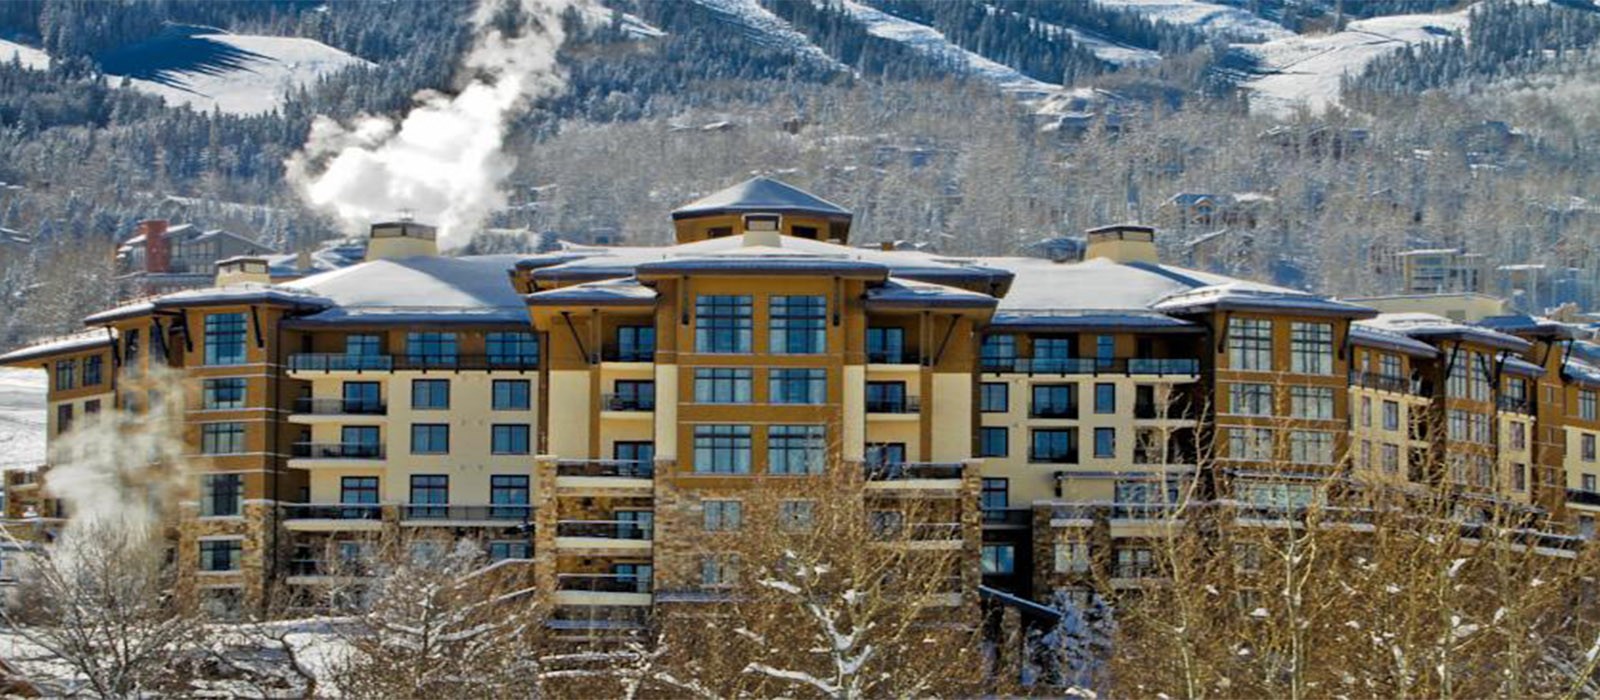 viceroy-snowmass-united-states-holiday-header